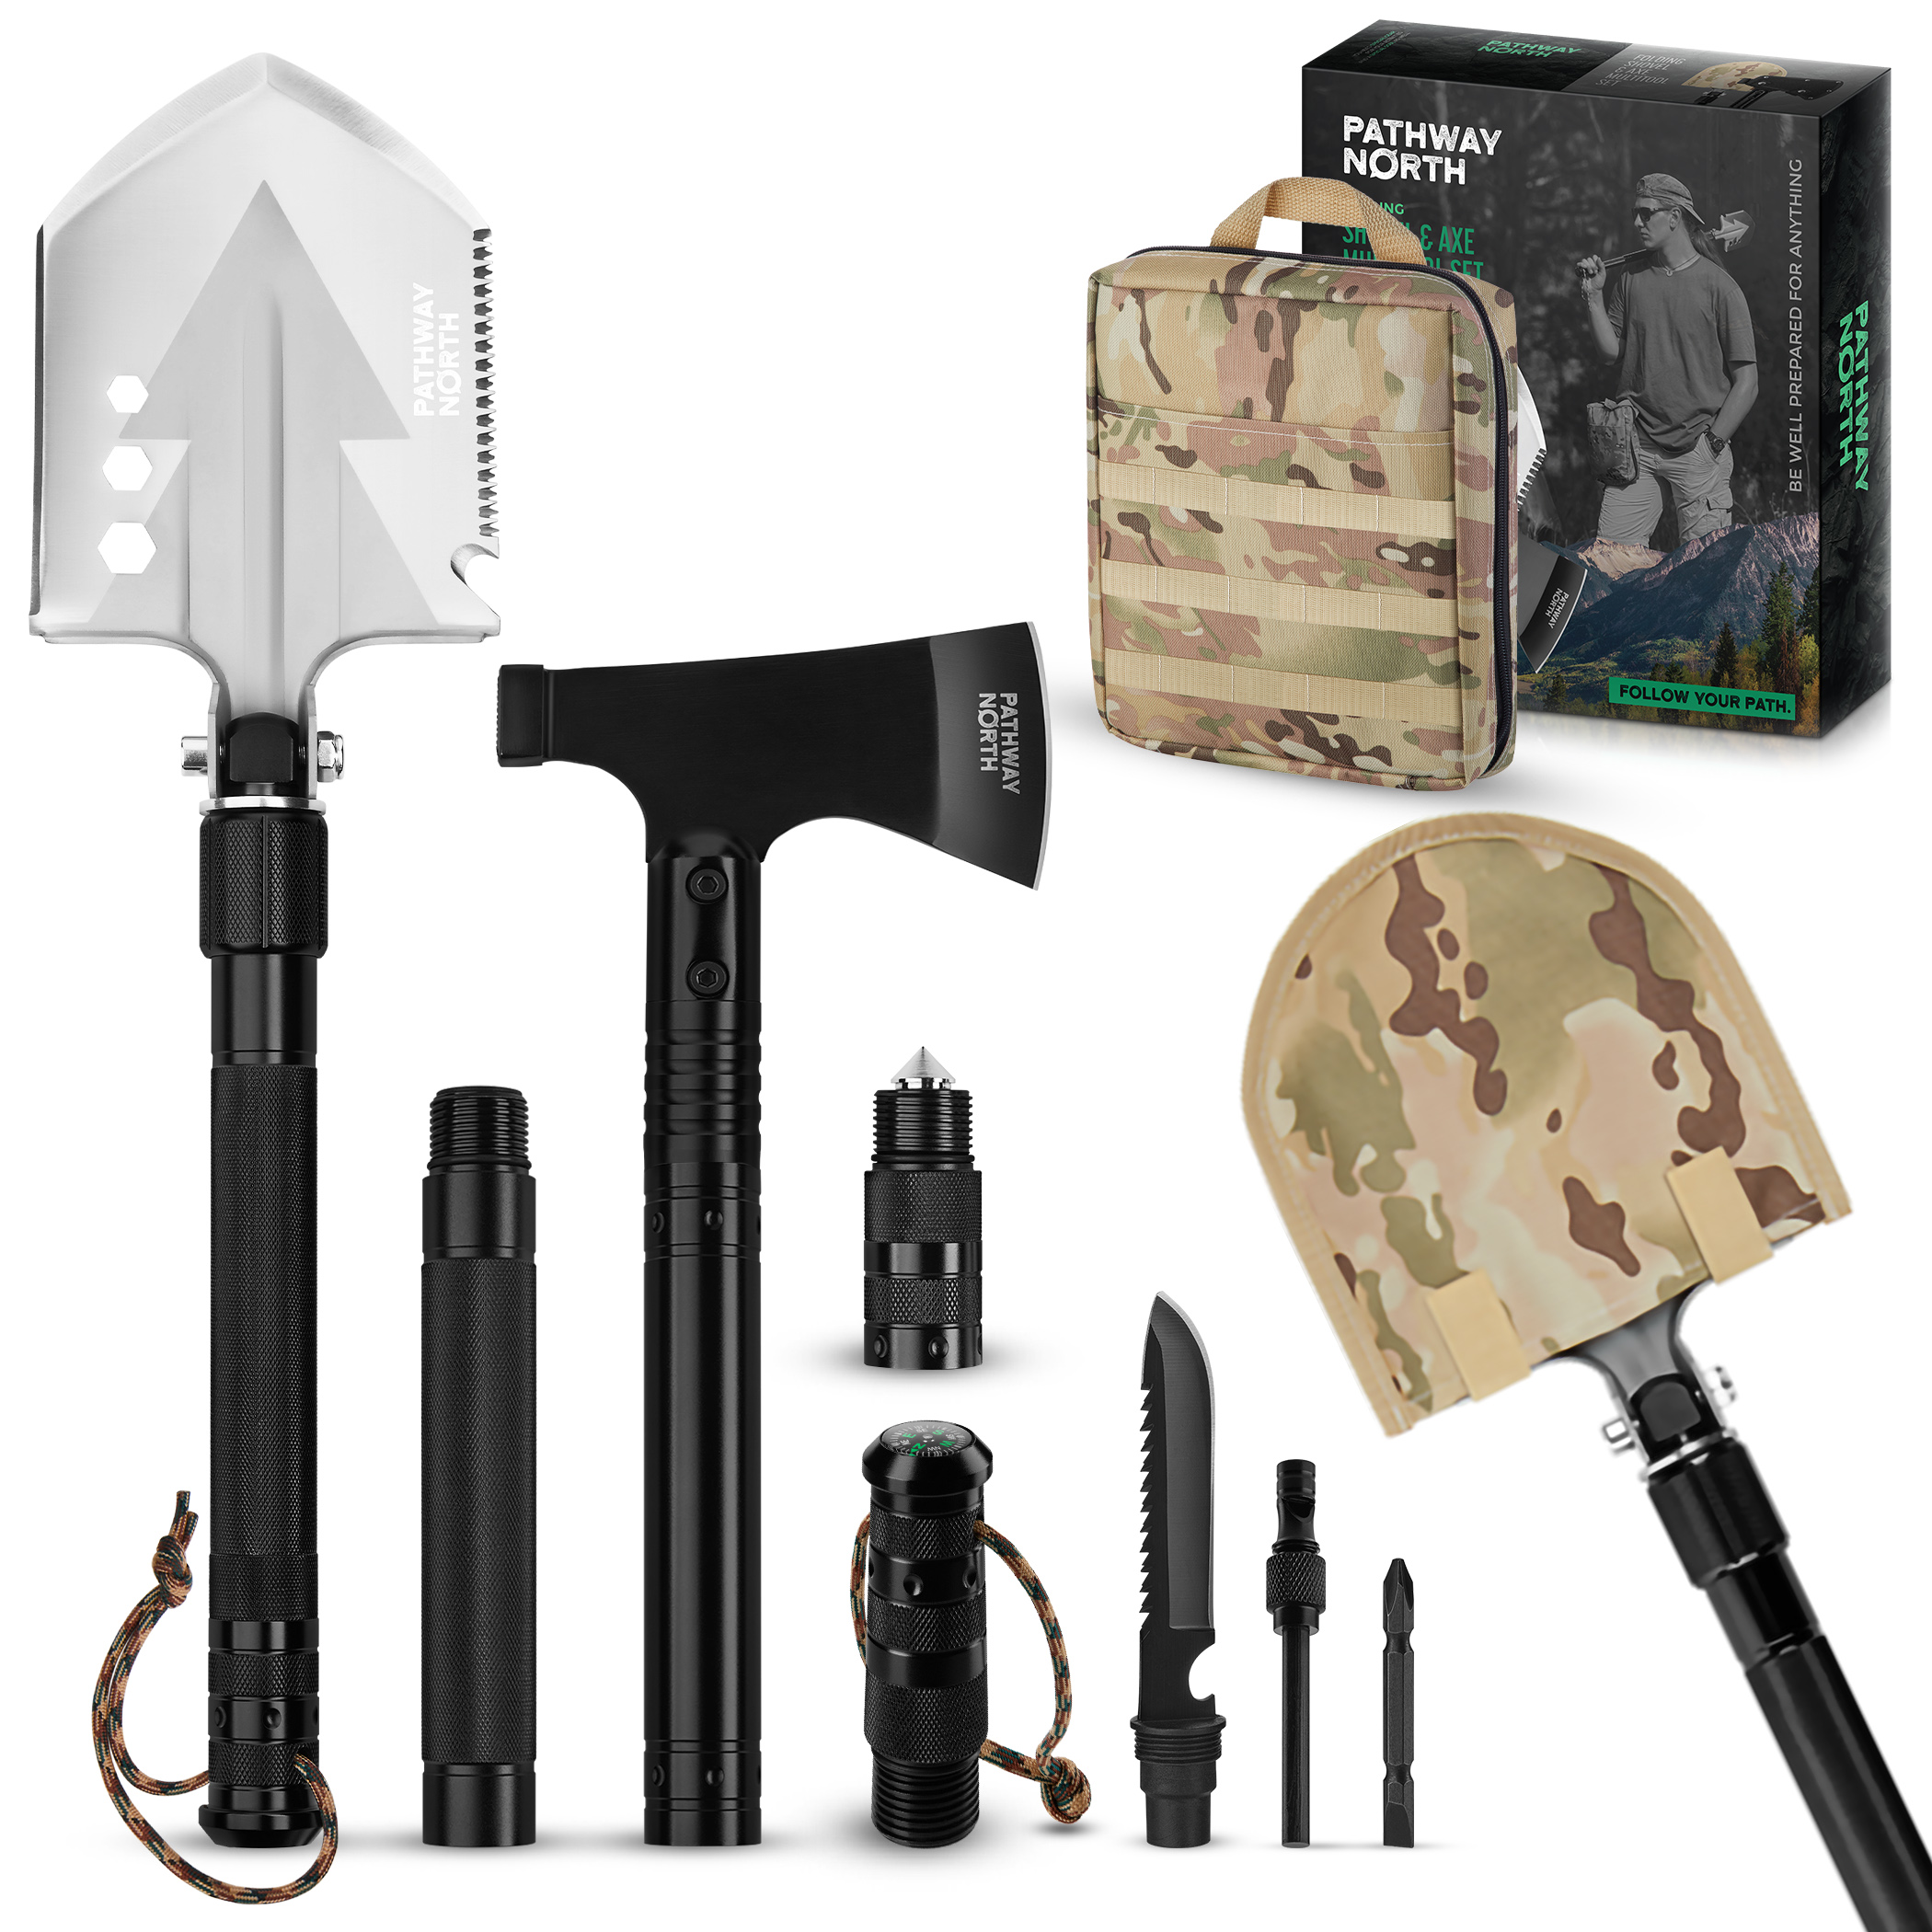 Pathway North Survival Shovel and Camping Axe – Stainless Steel Tactical, Survival Multi-Tool and Survival Hatchet Equipment for Outdoor Hiking Camping Gear, Hunting, Backpacking Emergency Kit - image 1 of 8